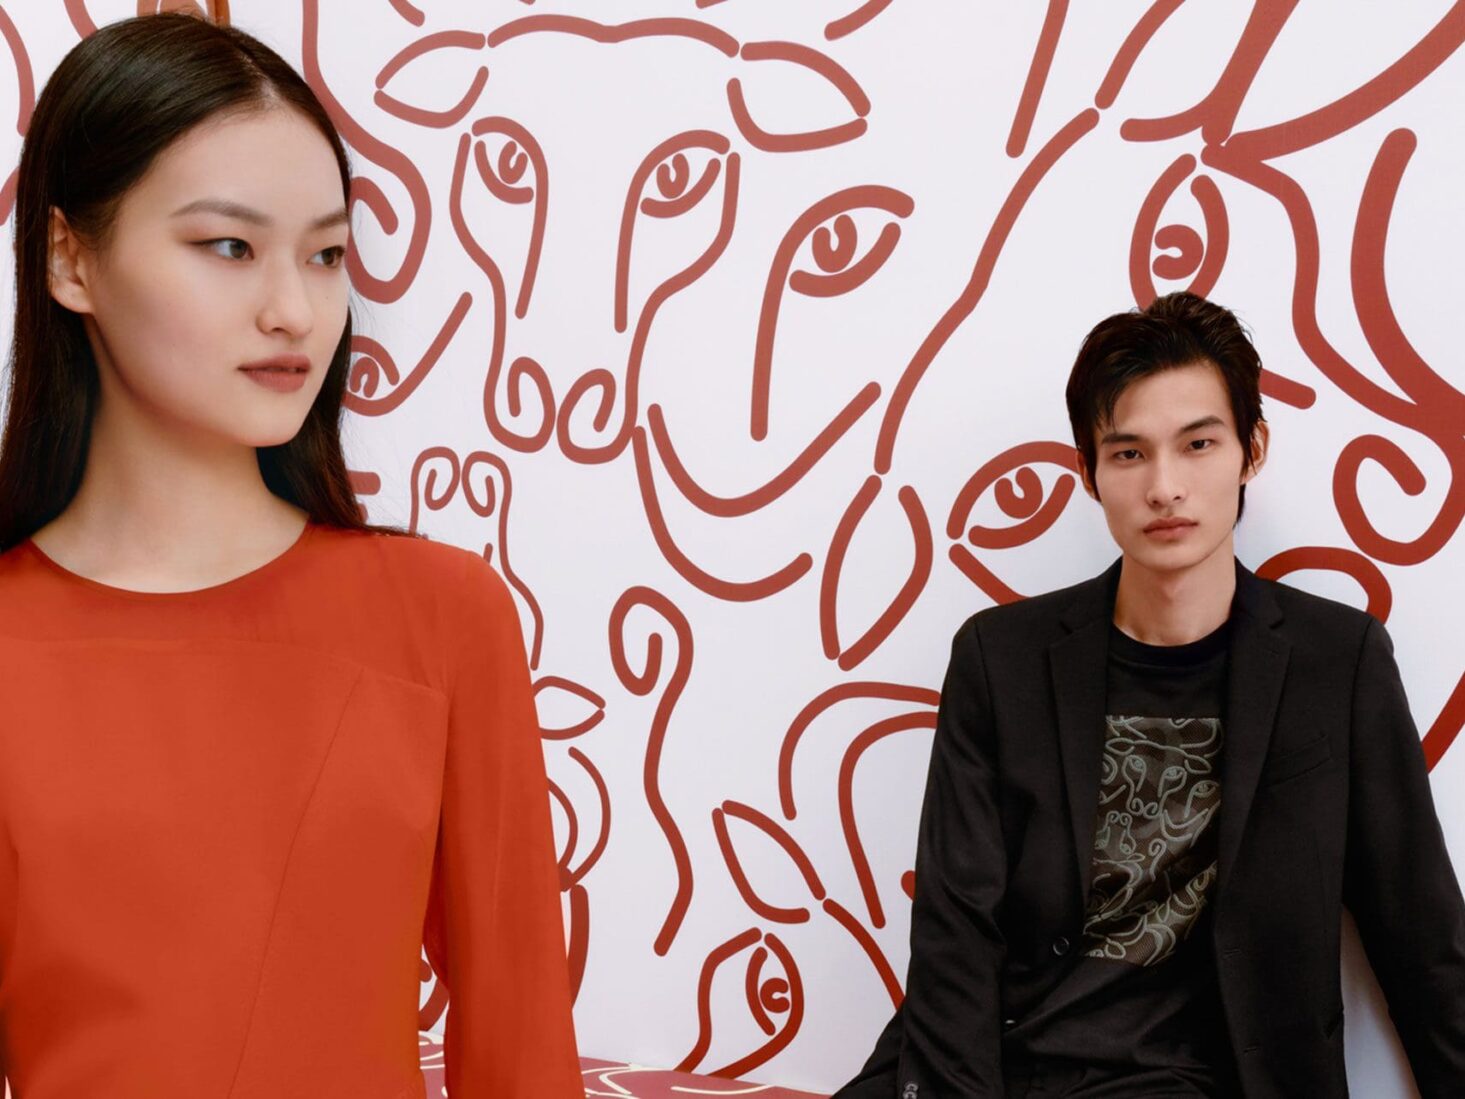 Best Lunar New Year Campaigns & Collections